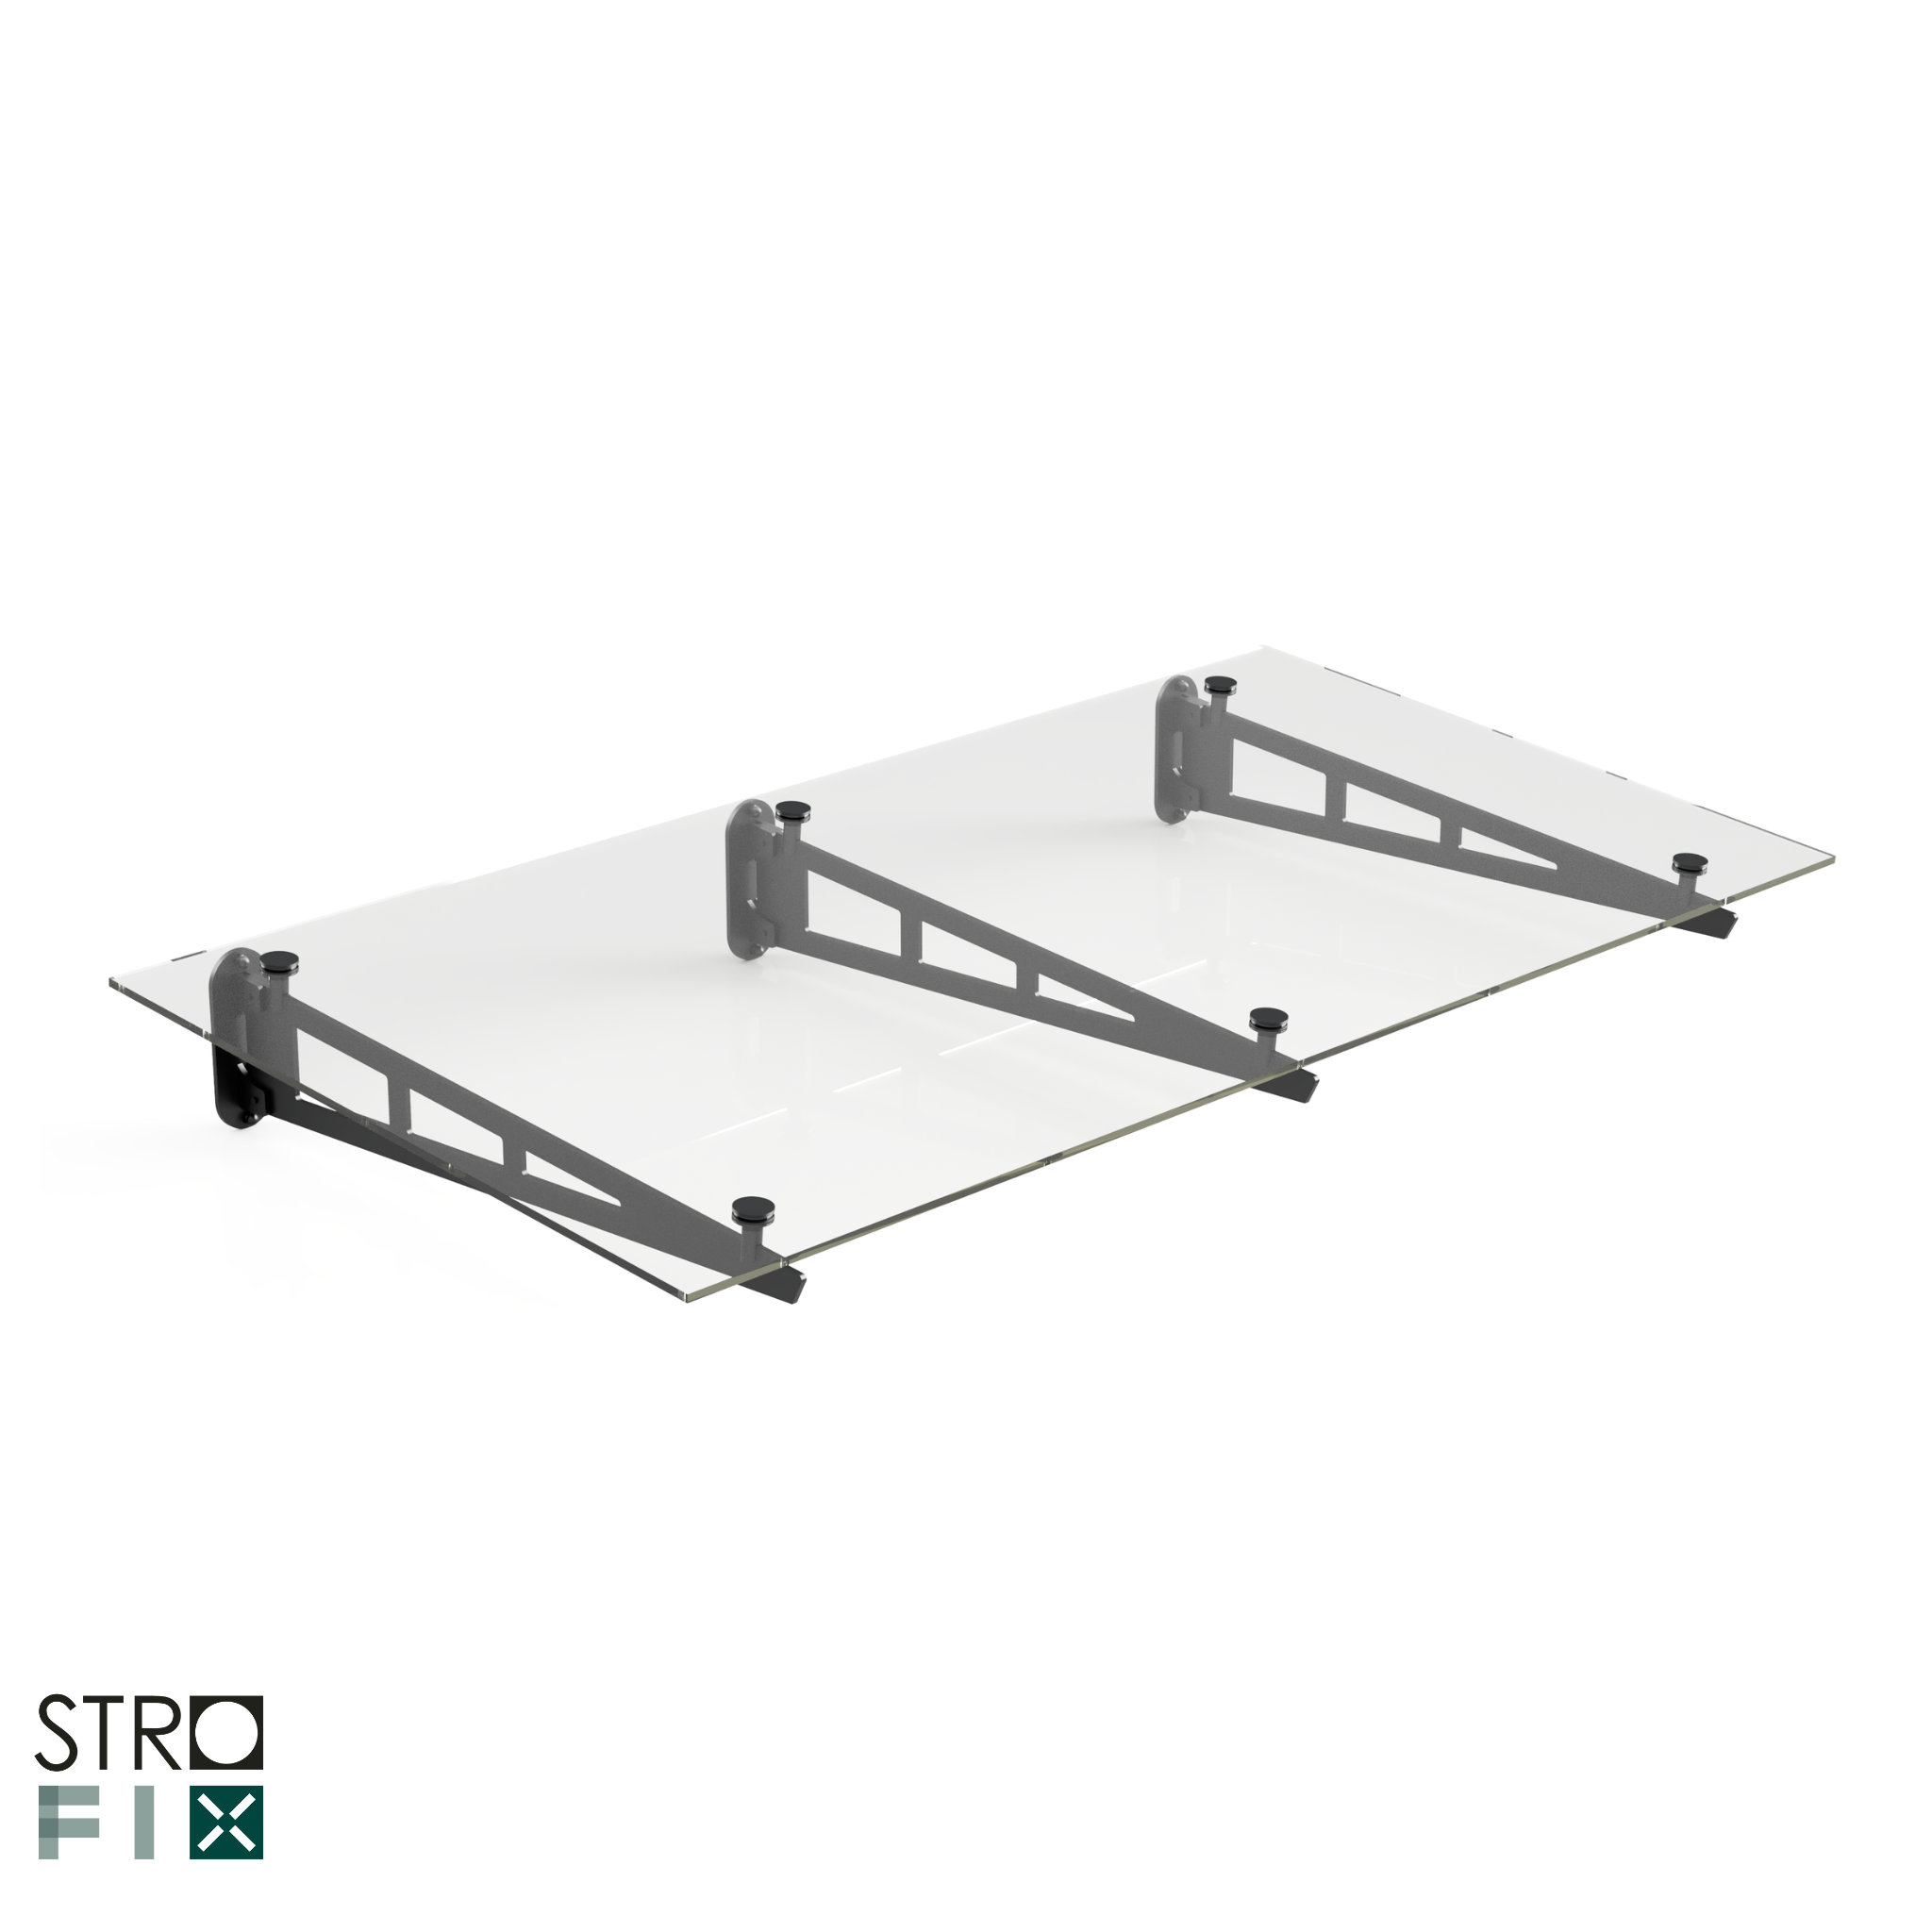 Glass canopy on 3 supports - StroFIX